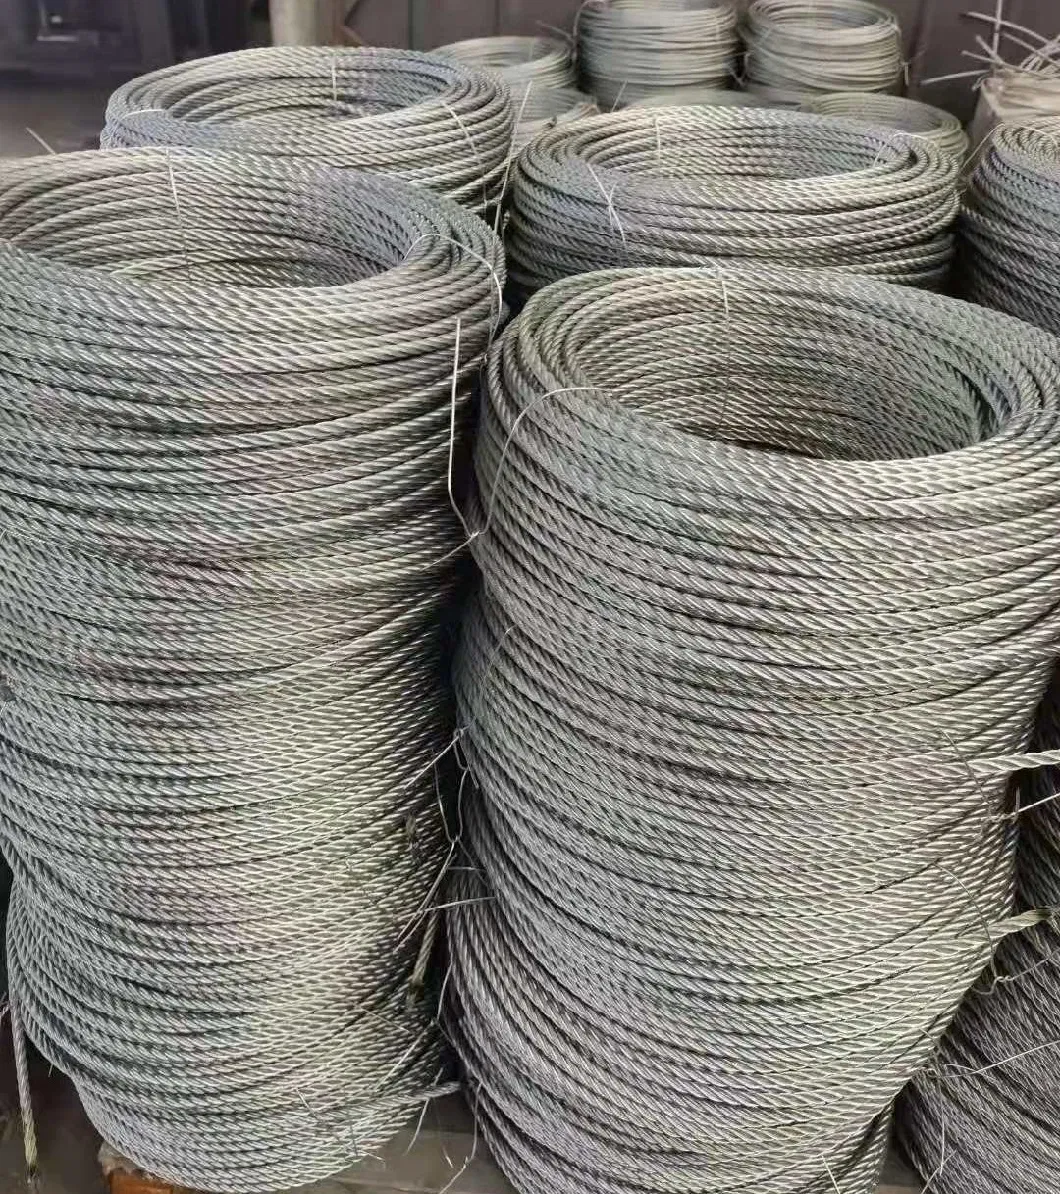 19mm Black Oxide Stainless Steel Wire Rope